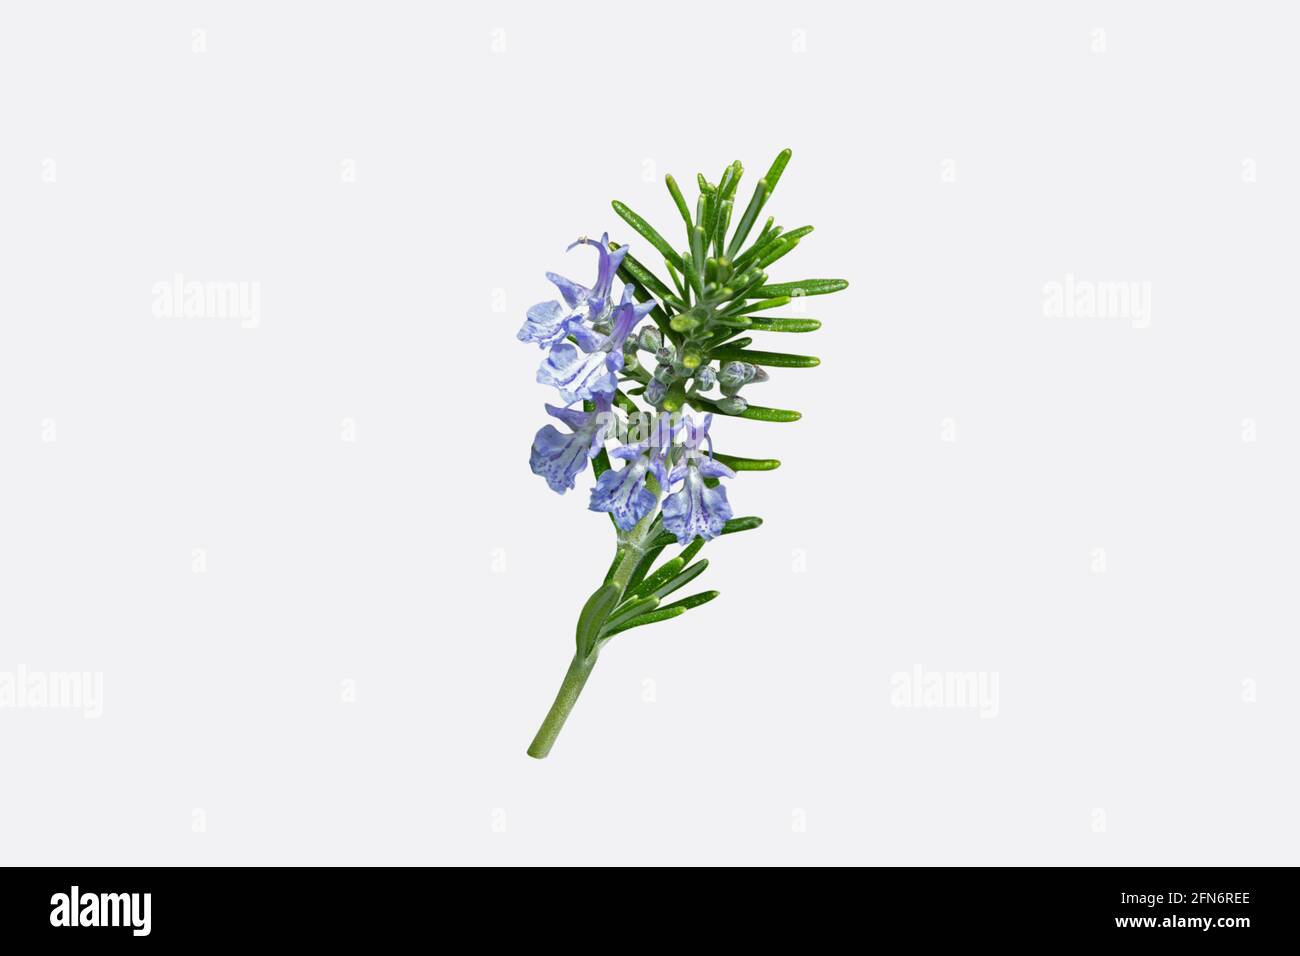 Rosemary branch with leaves and blue flowers isolated on white. Salvia rosmarinus plant Stock Photo